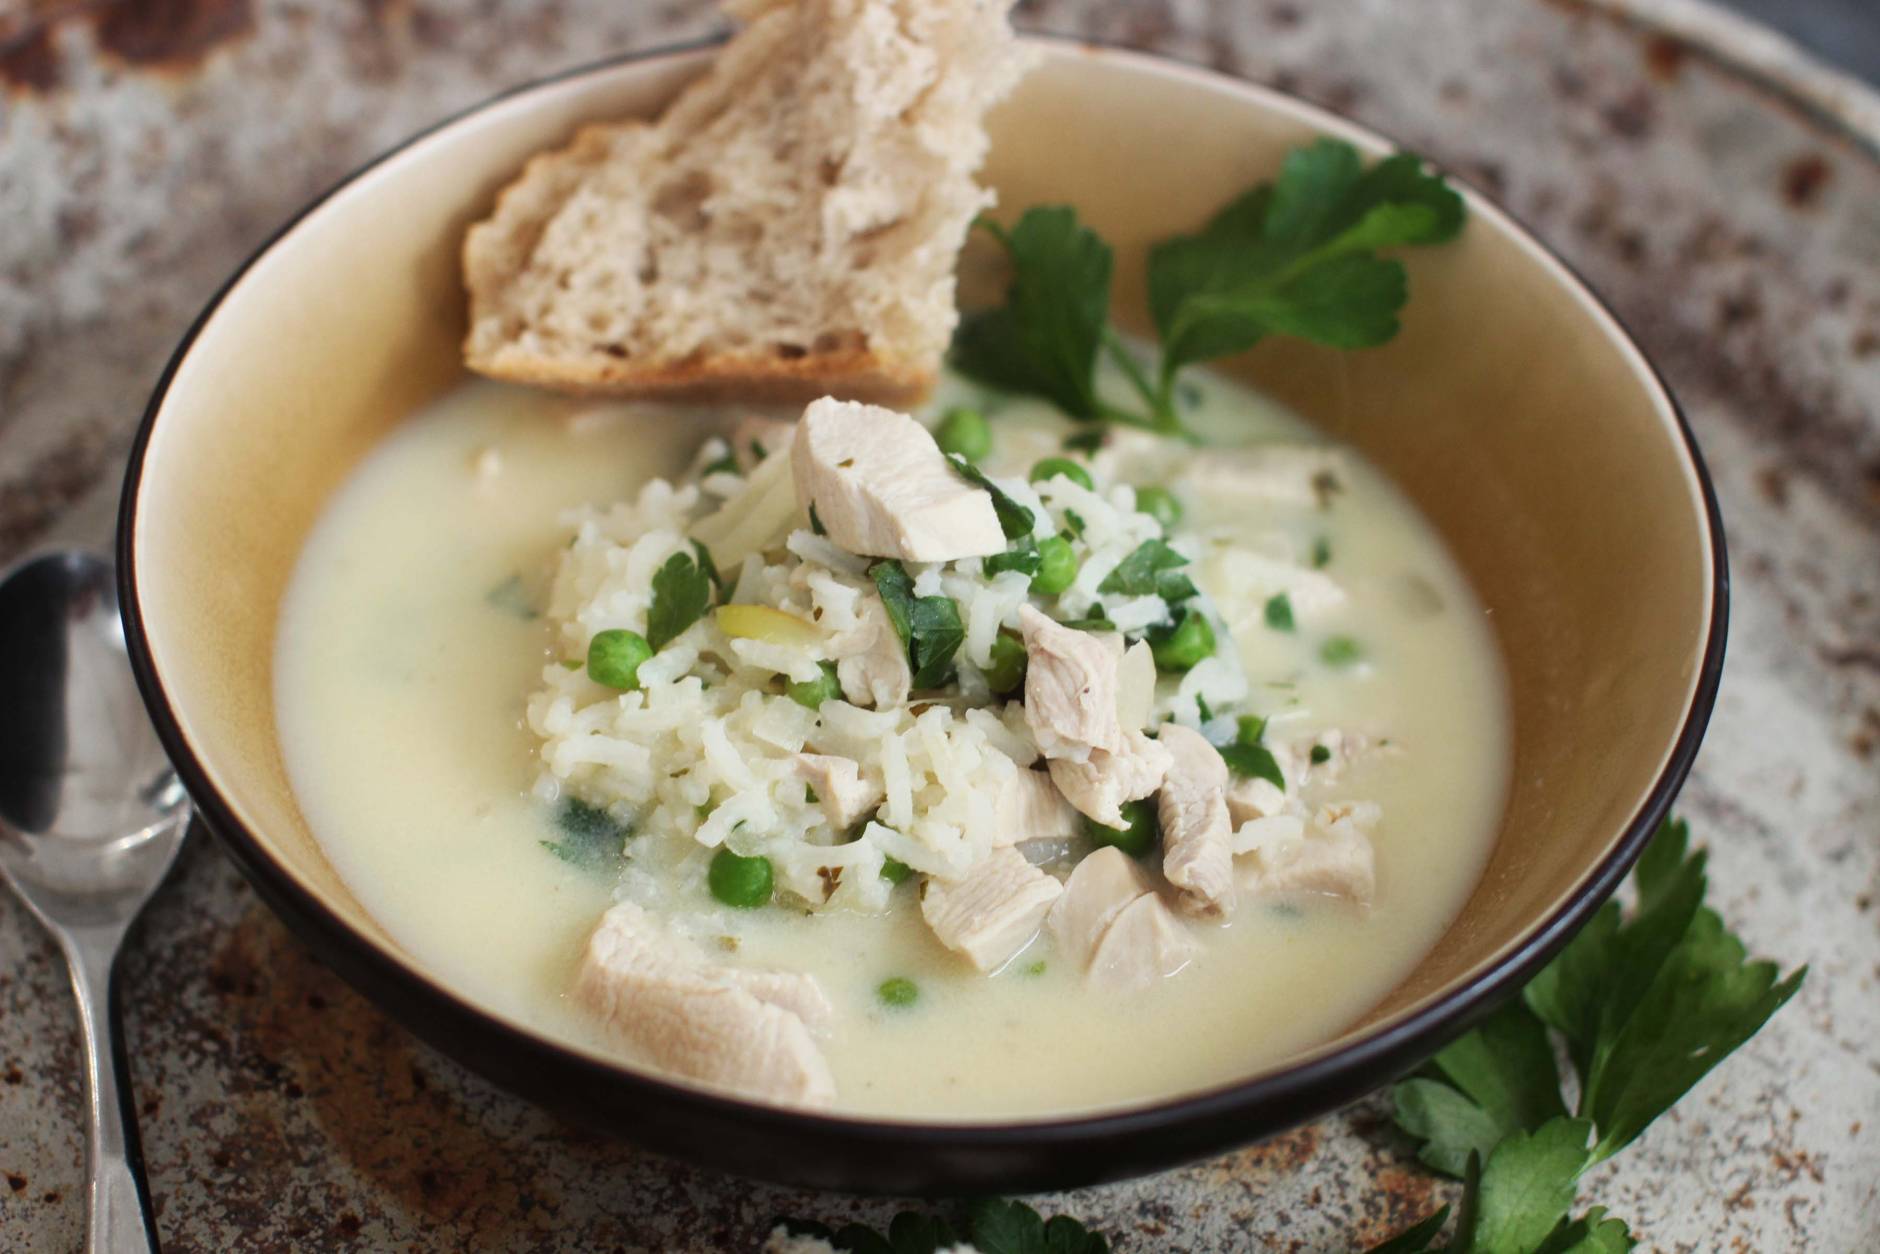 This Feb. 8, 2016 photo shows avgolemono in Concord, N.H. This Greek chicken and rice soup gets a rich thickness from eggs that are tempered, then whisked into the hot broth, creating a delicious counterpoint to the fresh flavor of the lemon juice. (AP Photo/Matthew Mead)